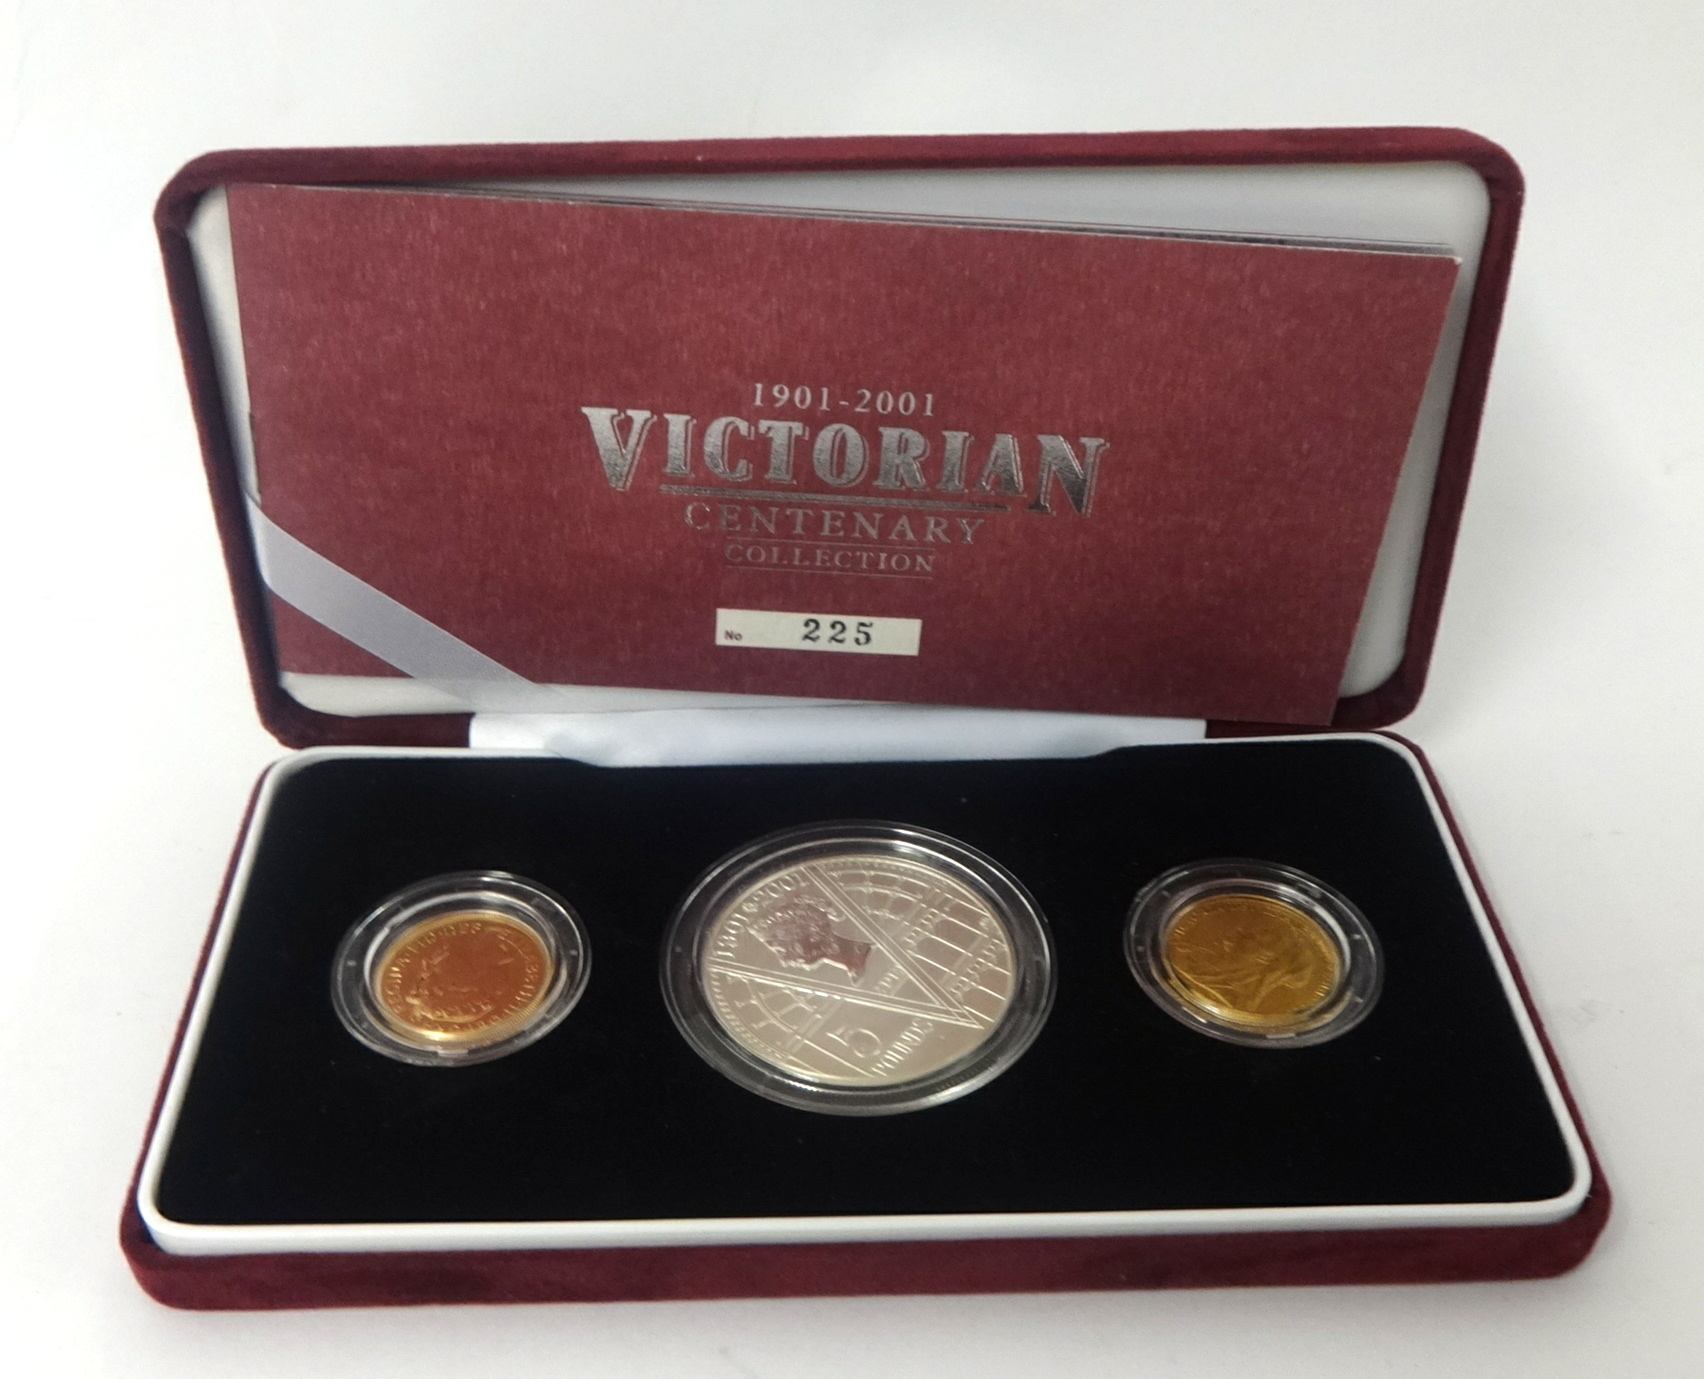 Royal Mint UK Victorian Centenary Collection, three coins two gold one silver comprising two